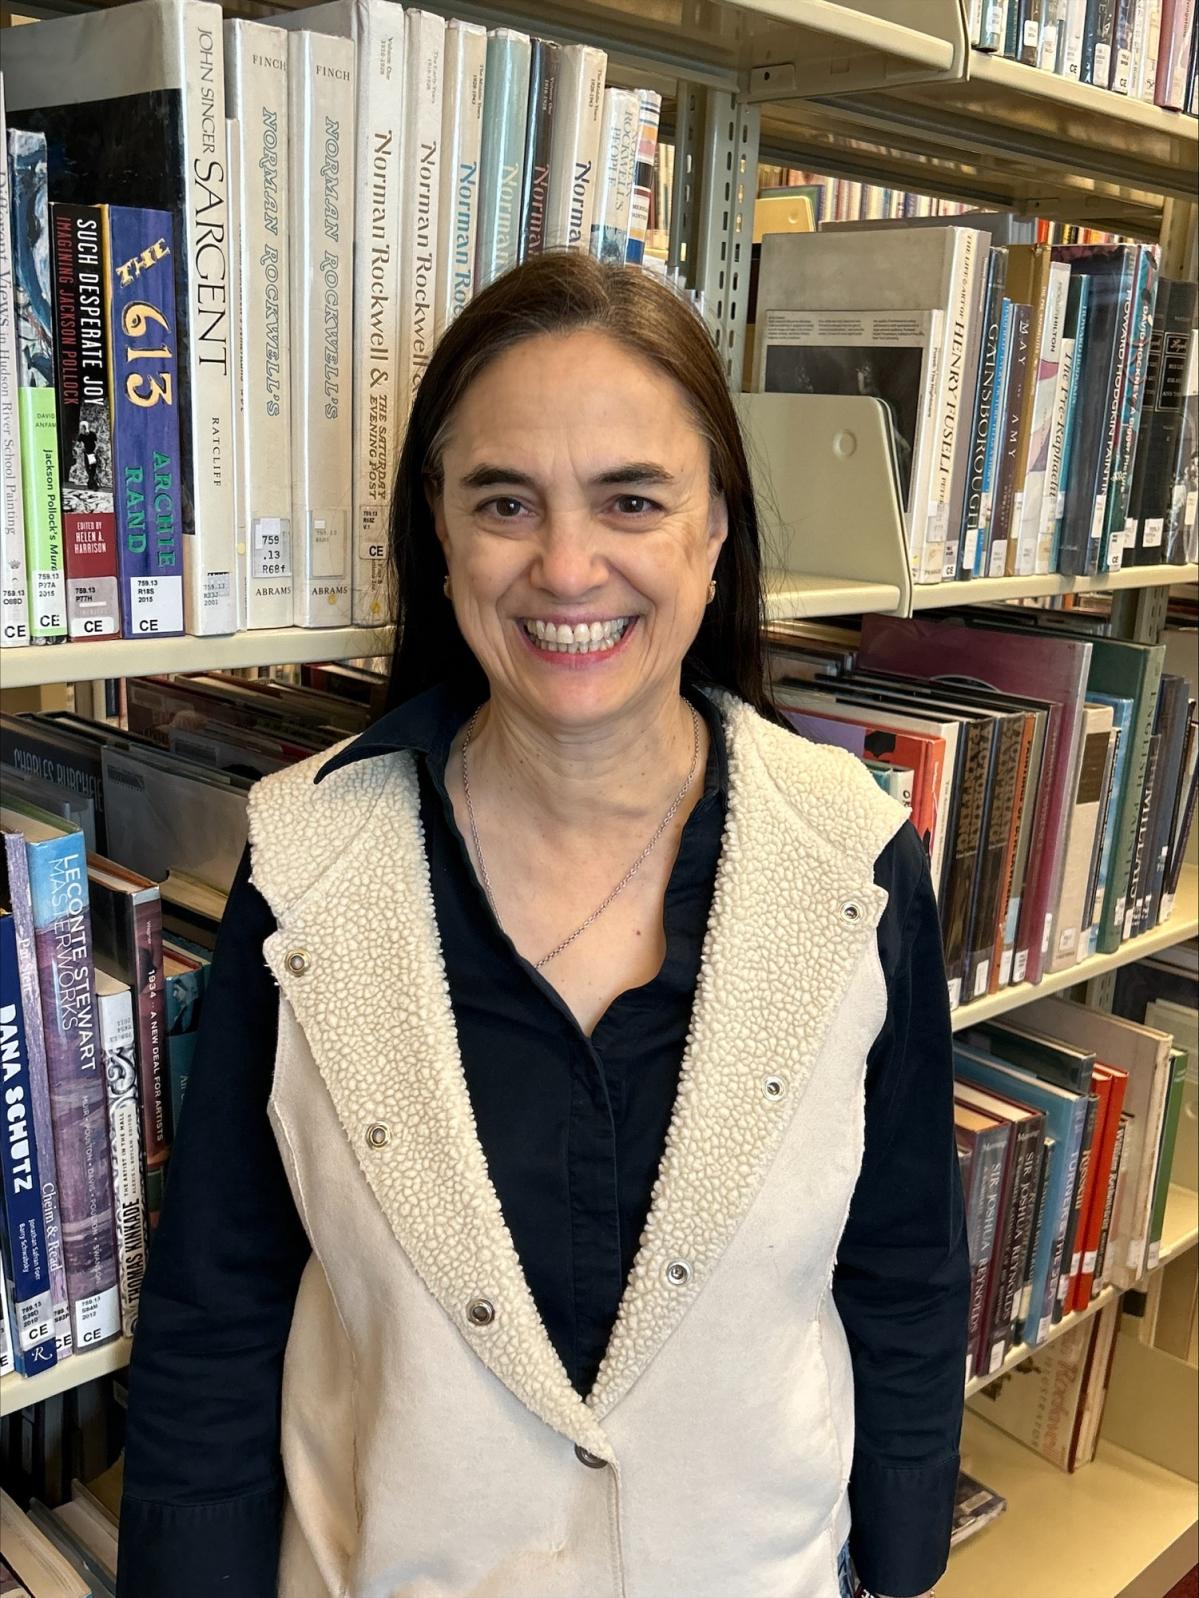 Smiling woman in front of a large bookshelf